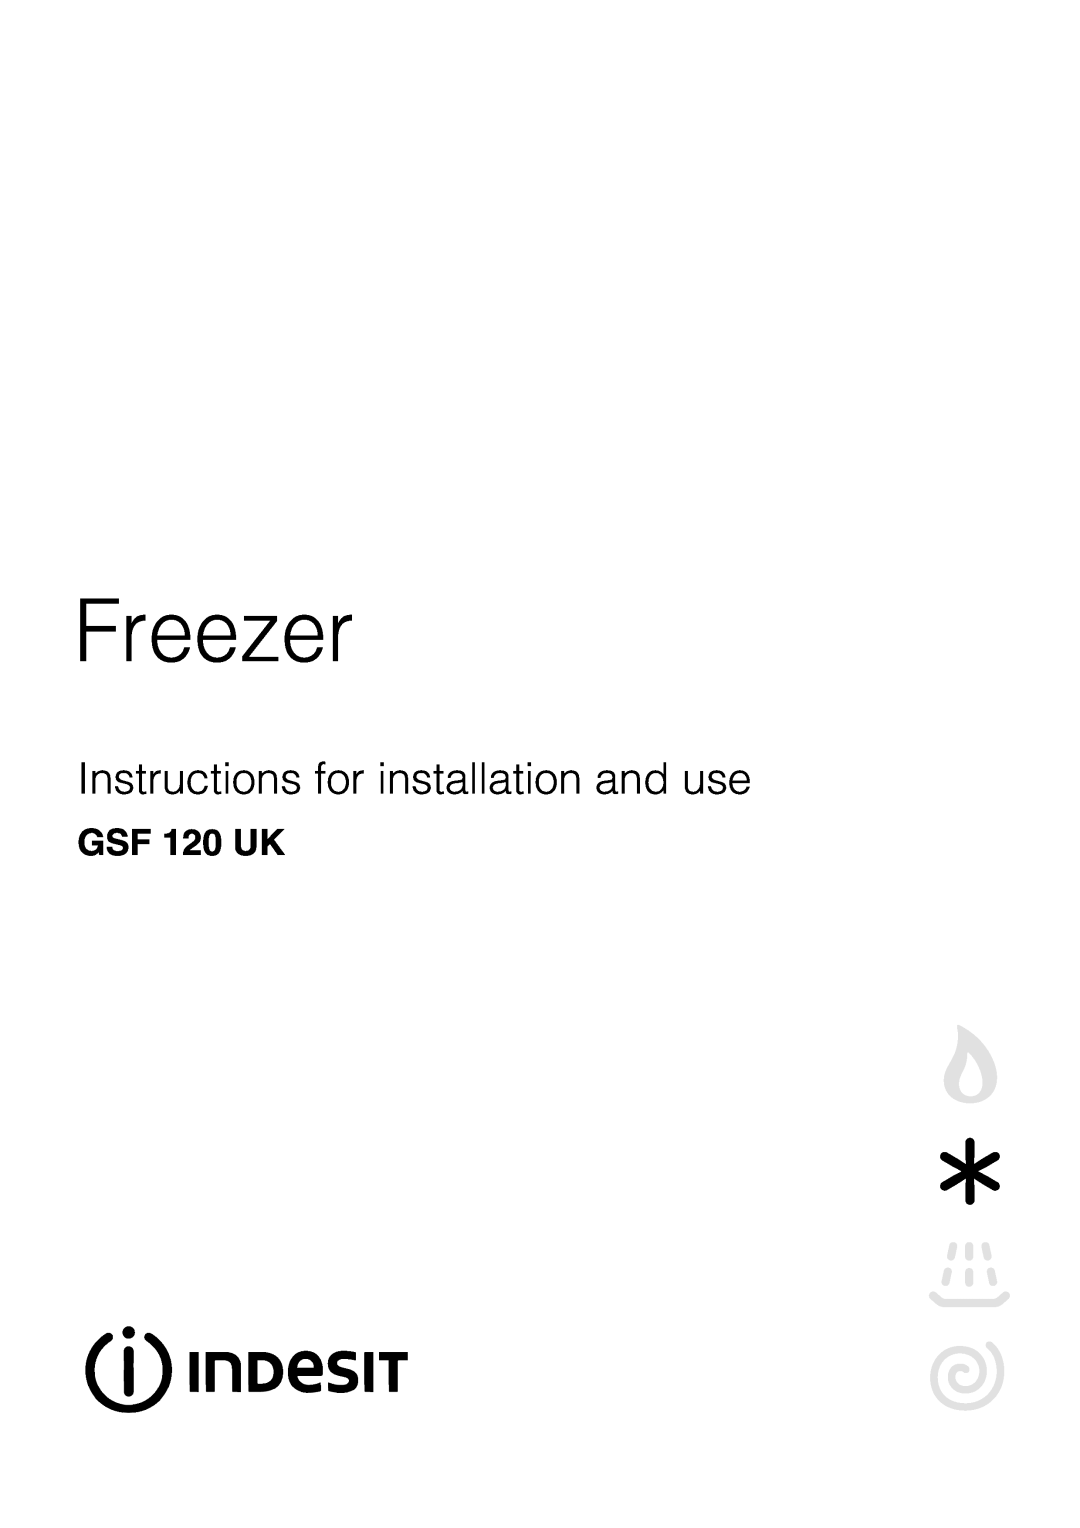 Indesit GSF 120 UK manual Freezer, Instructions for installation and use 